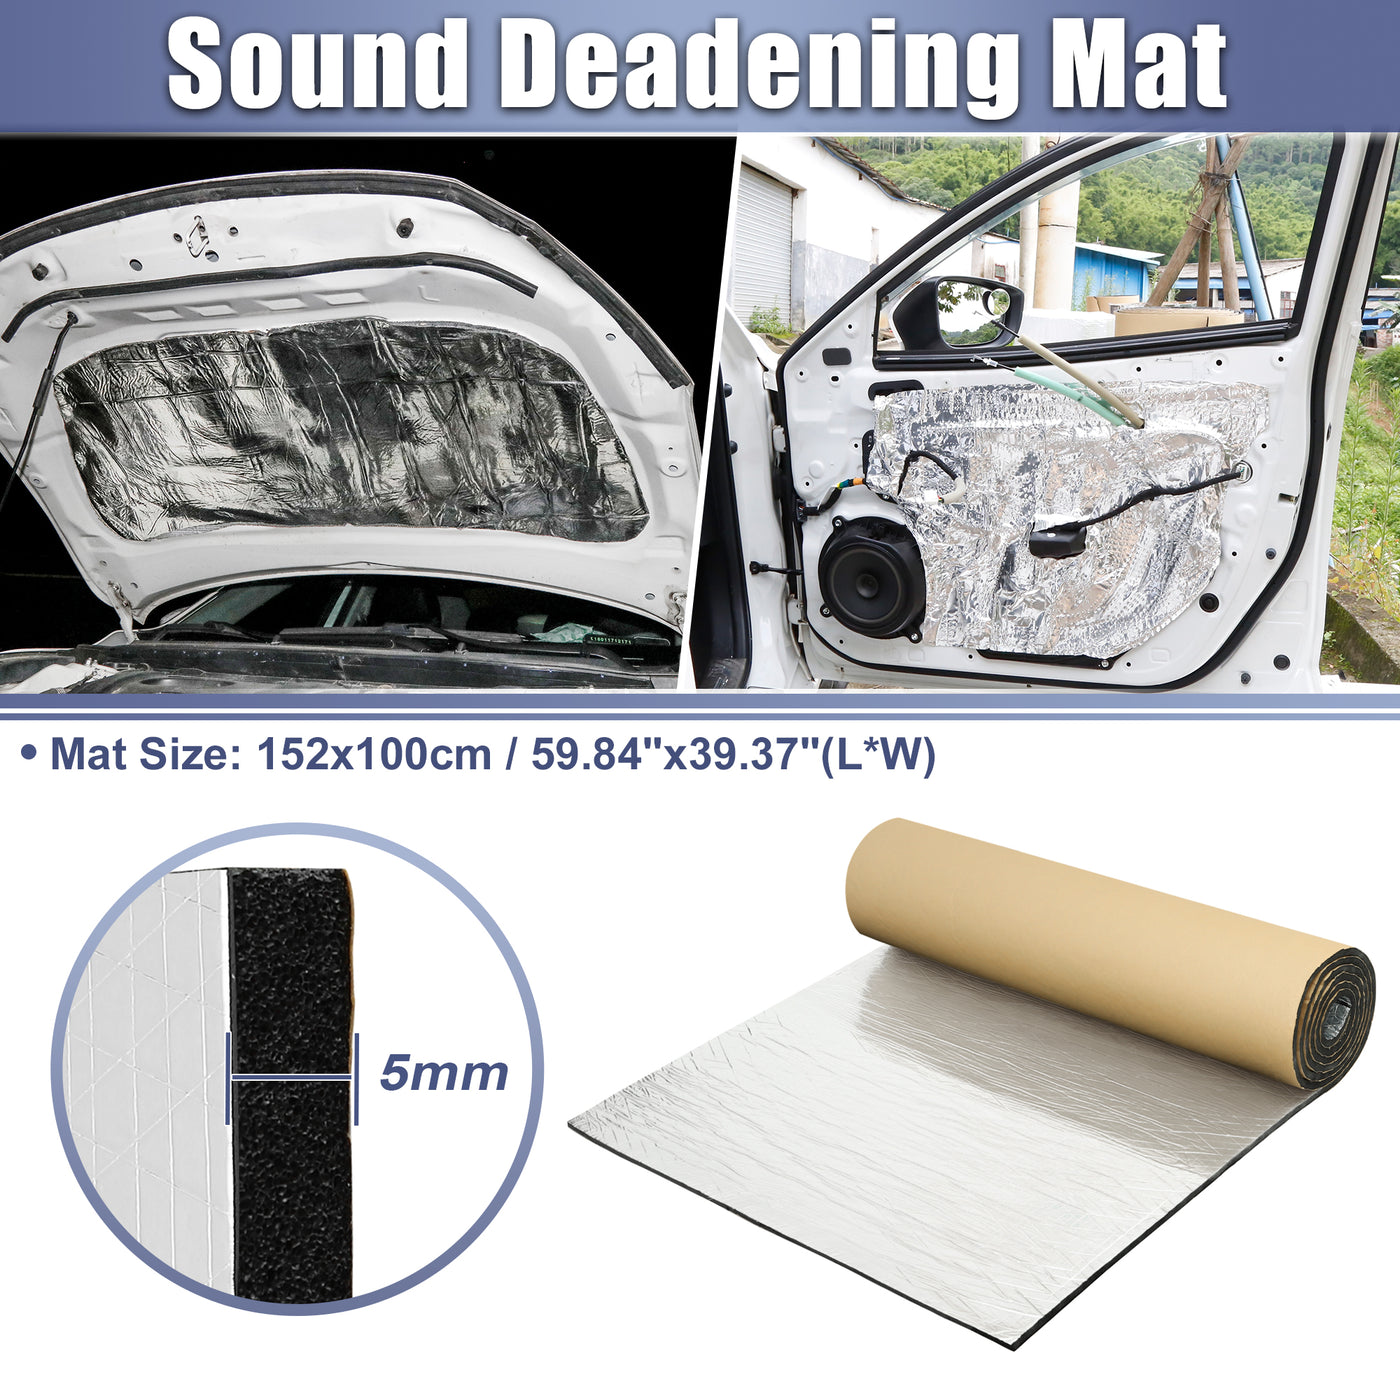 X AUTOHAUX 197mil 5mm 16.36sqft Car Sound Deadening Mat Aluminum Foil Closed Cell Foam Heat Shield Material Damping Self Adhesive Universal for Hood Fender and Boat Engine Cover 59.84"x39.37"